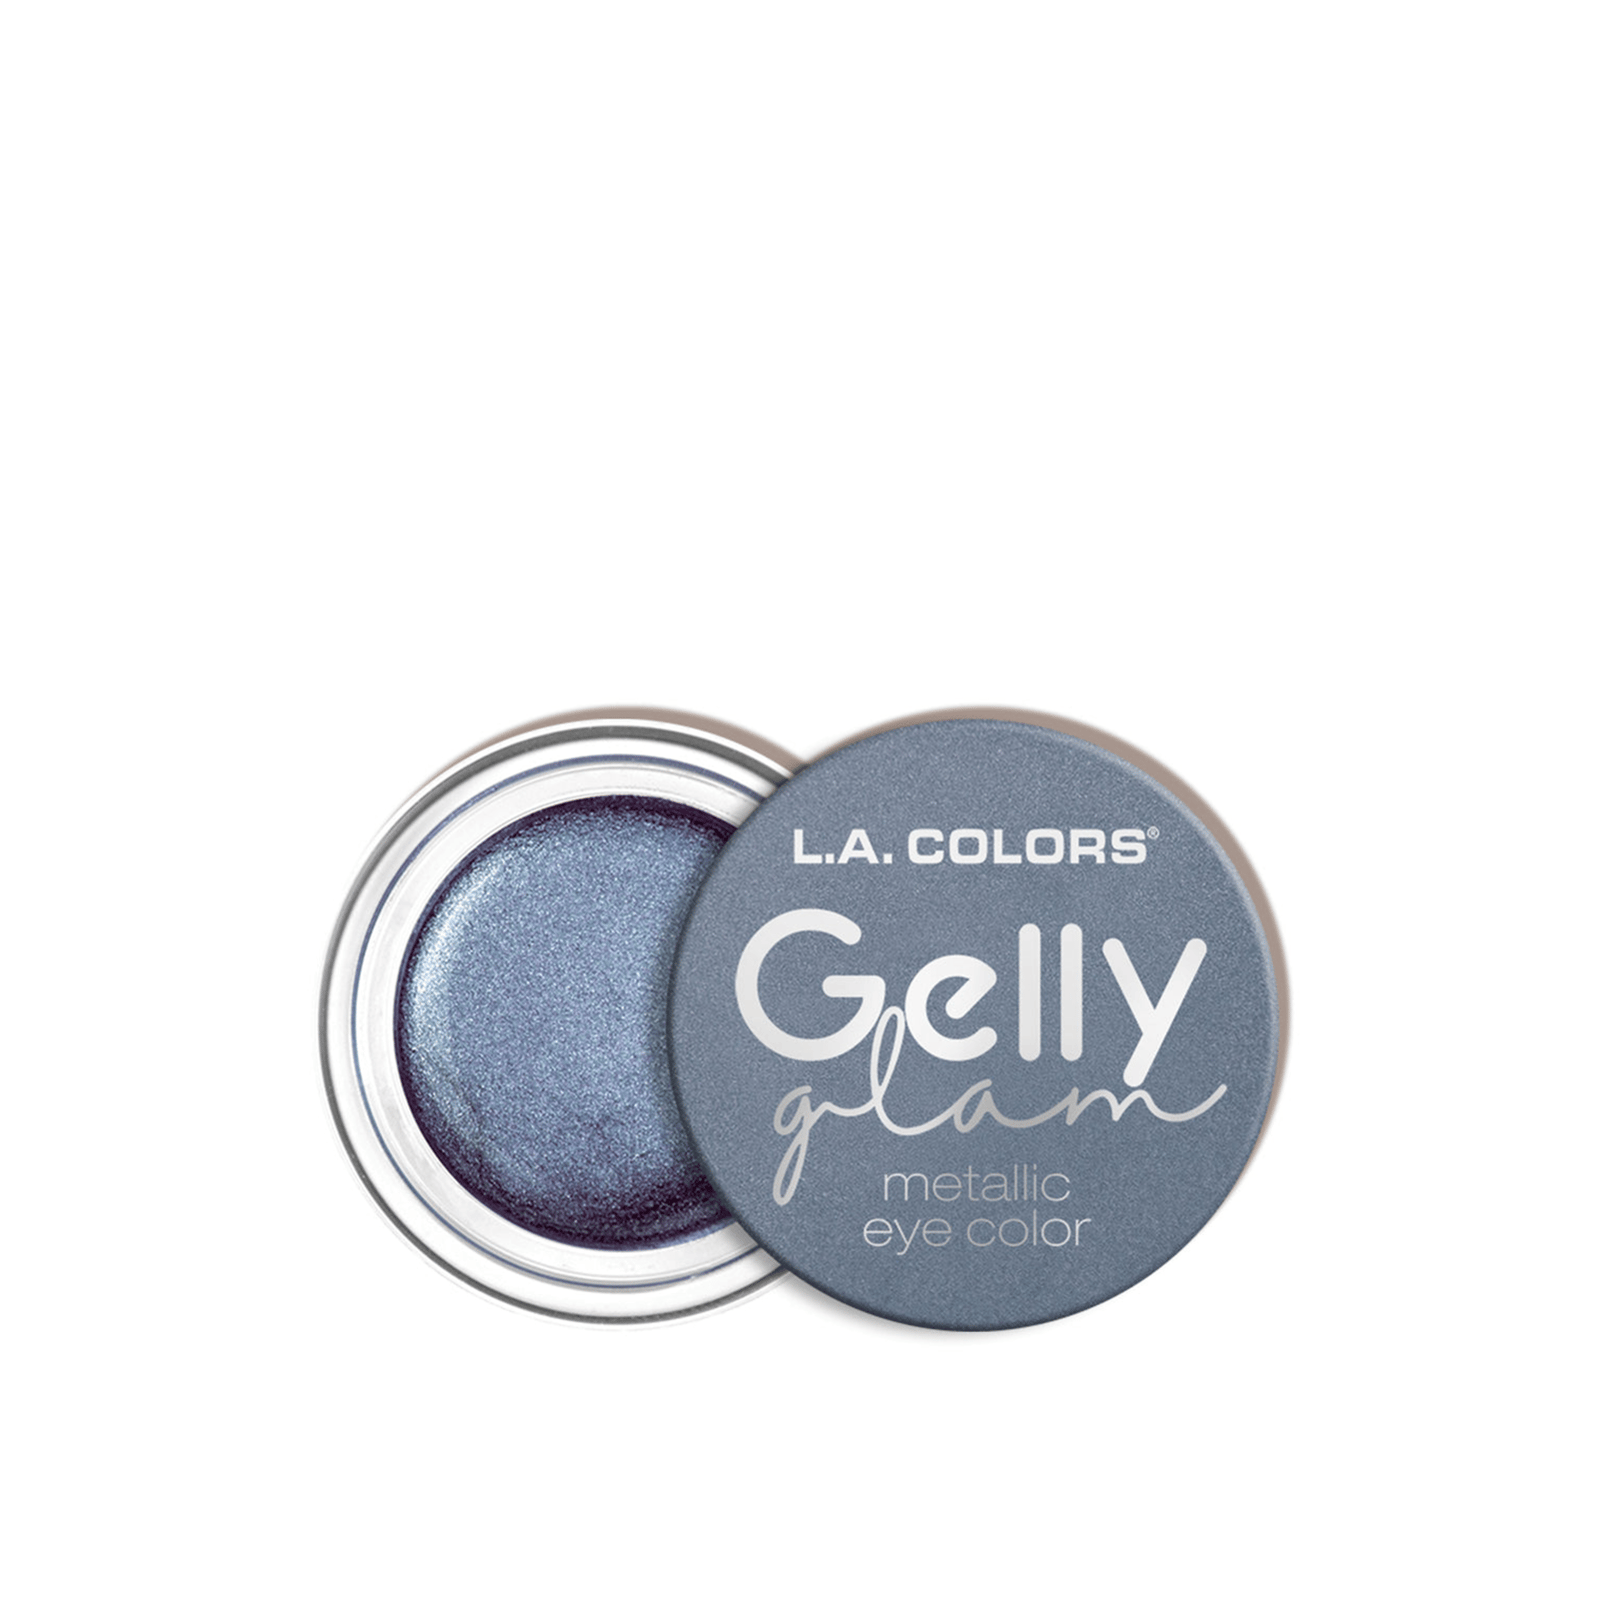 L.A Colors Gelly Glam Metallic Eye Color CES288 Blue Lightning 5ml